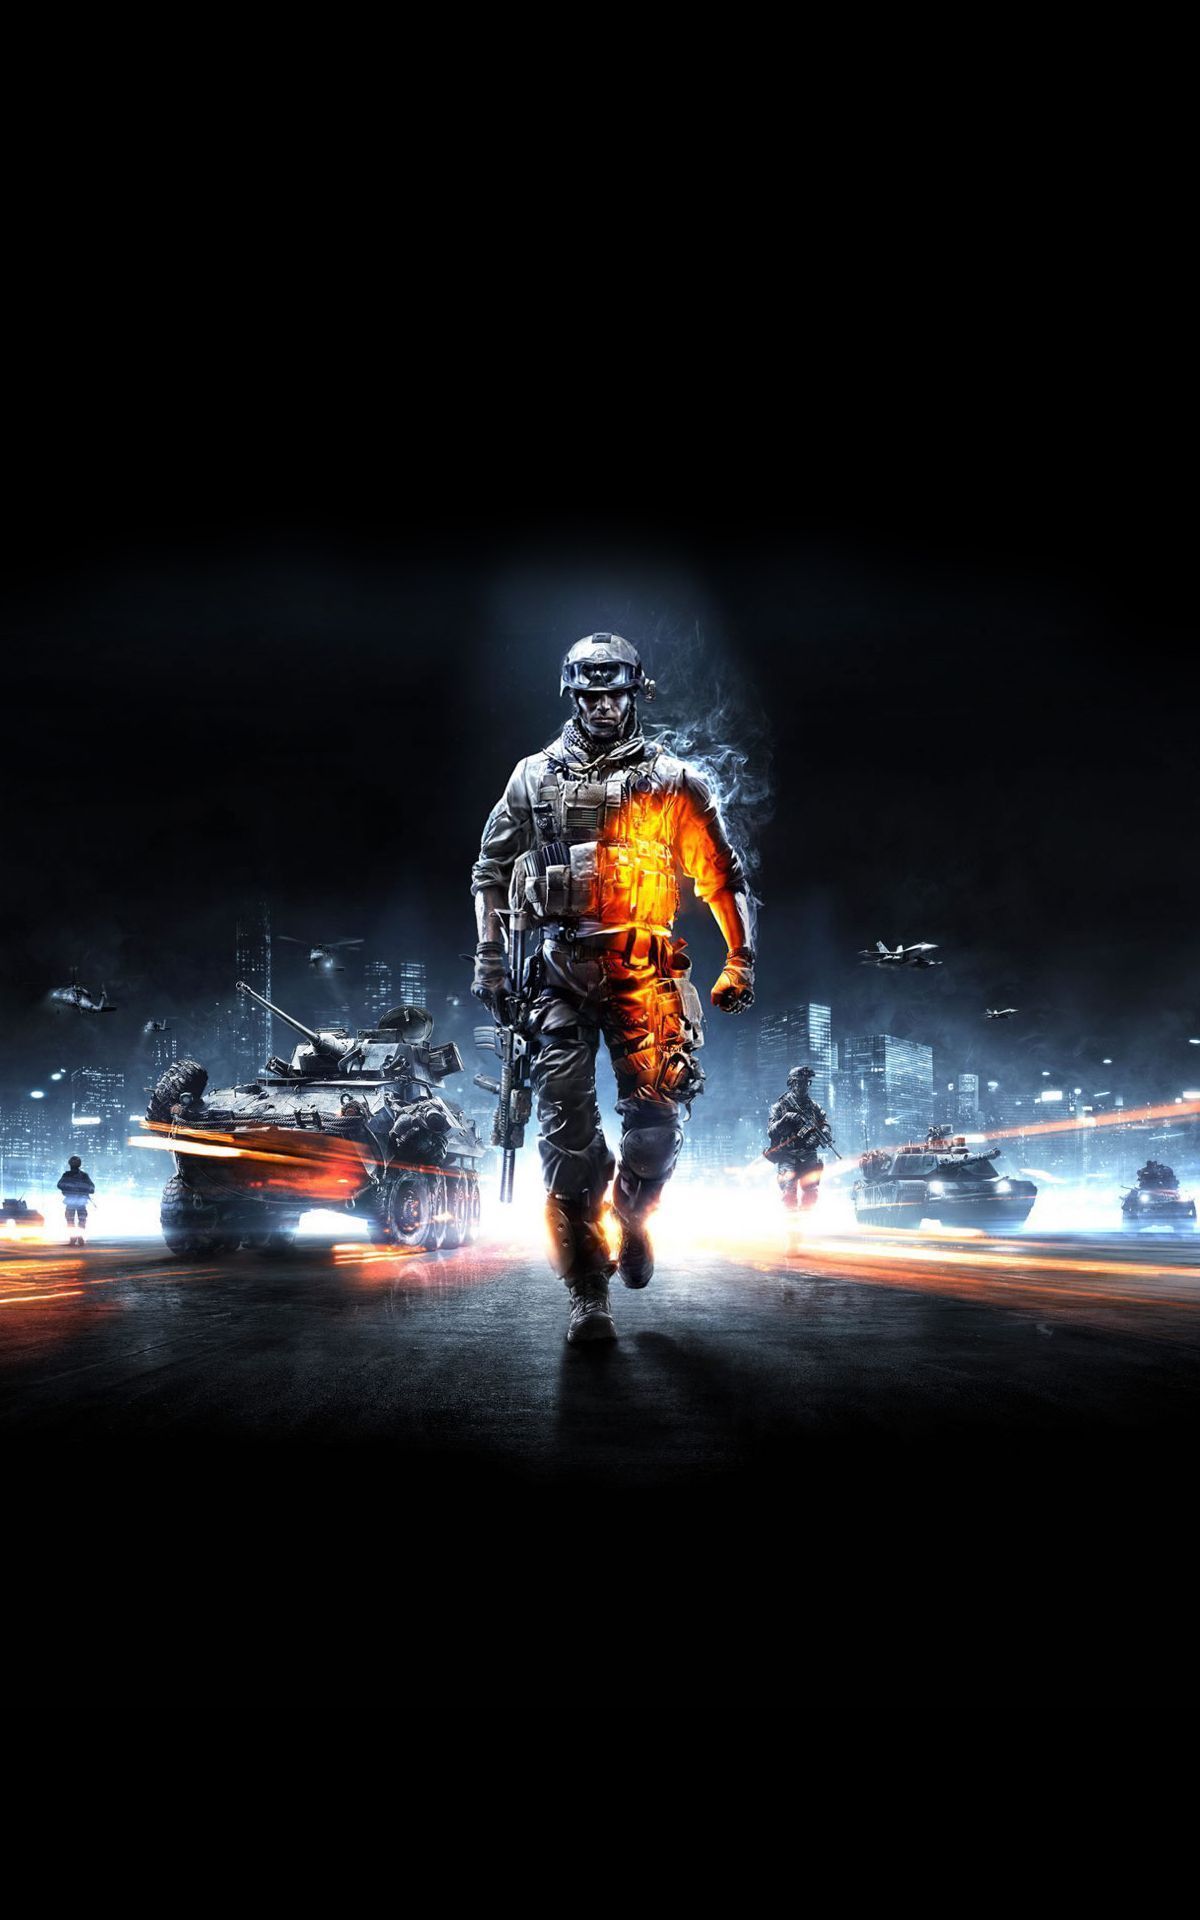 Sony Xperia Z3 tablet compact Wallpaper: Battlefield 3 Mobile ...